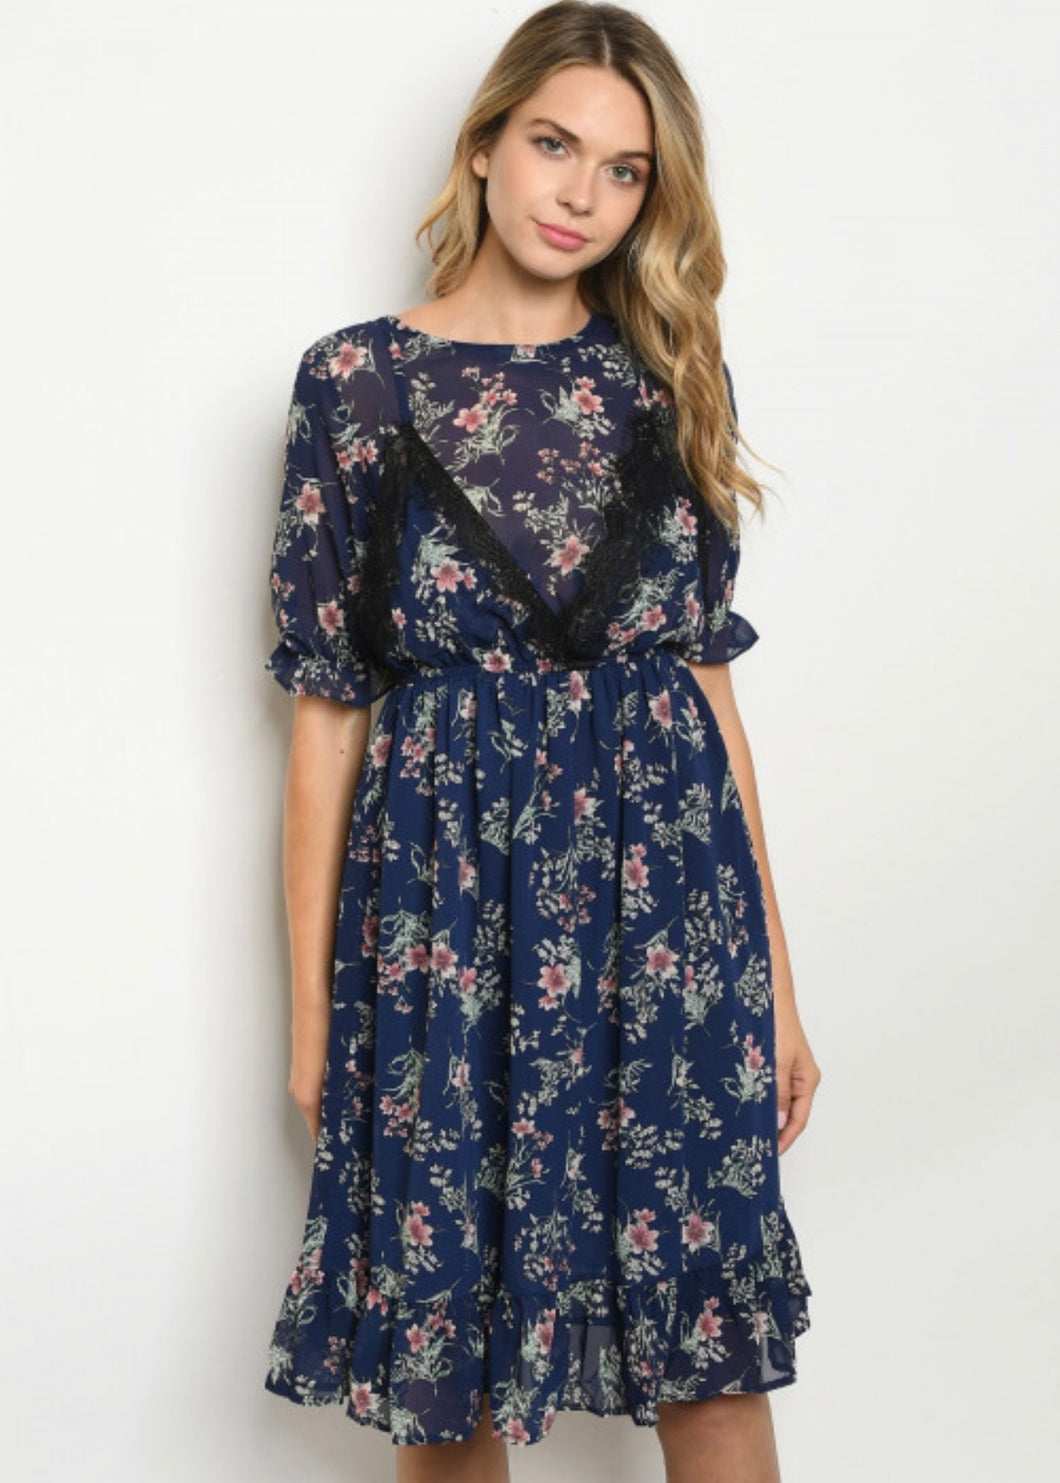 Layered Floral Navy Dress